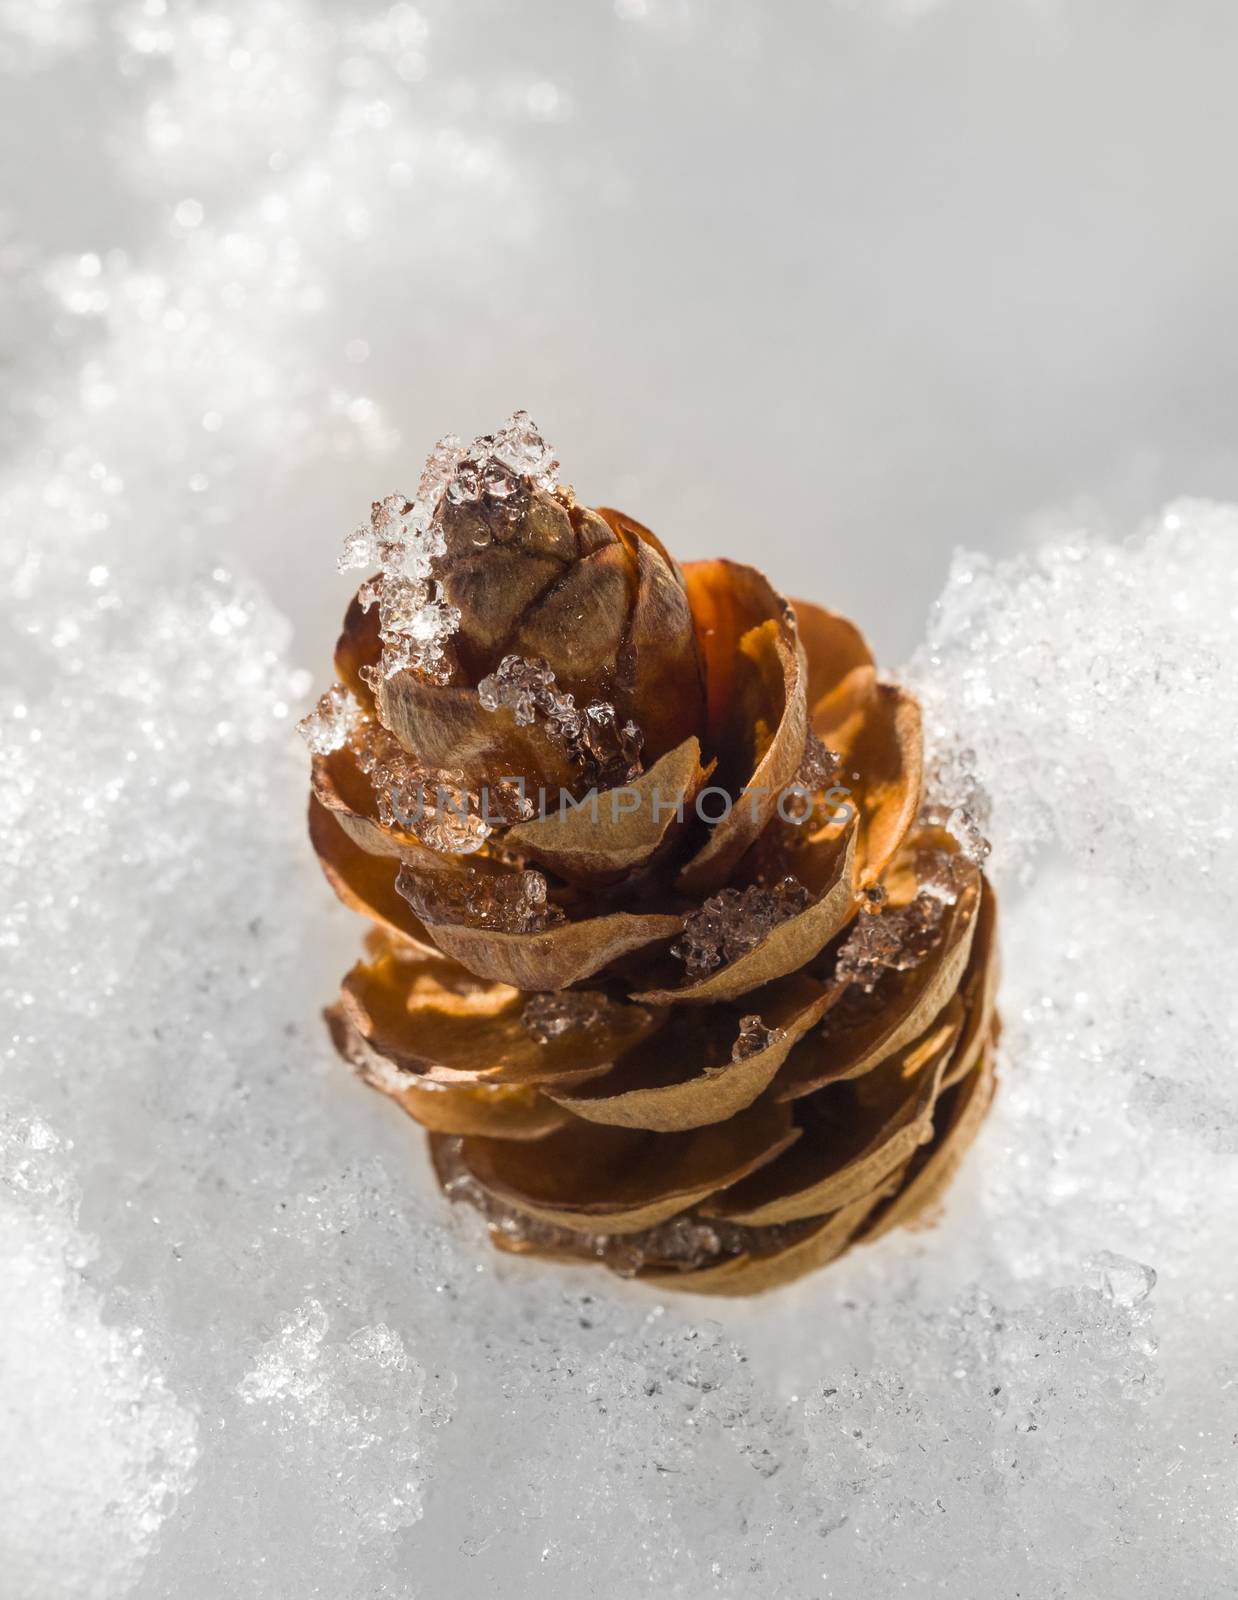 Single pine cone in the snow by Njean